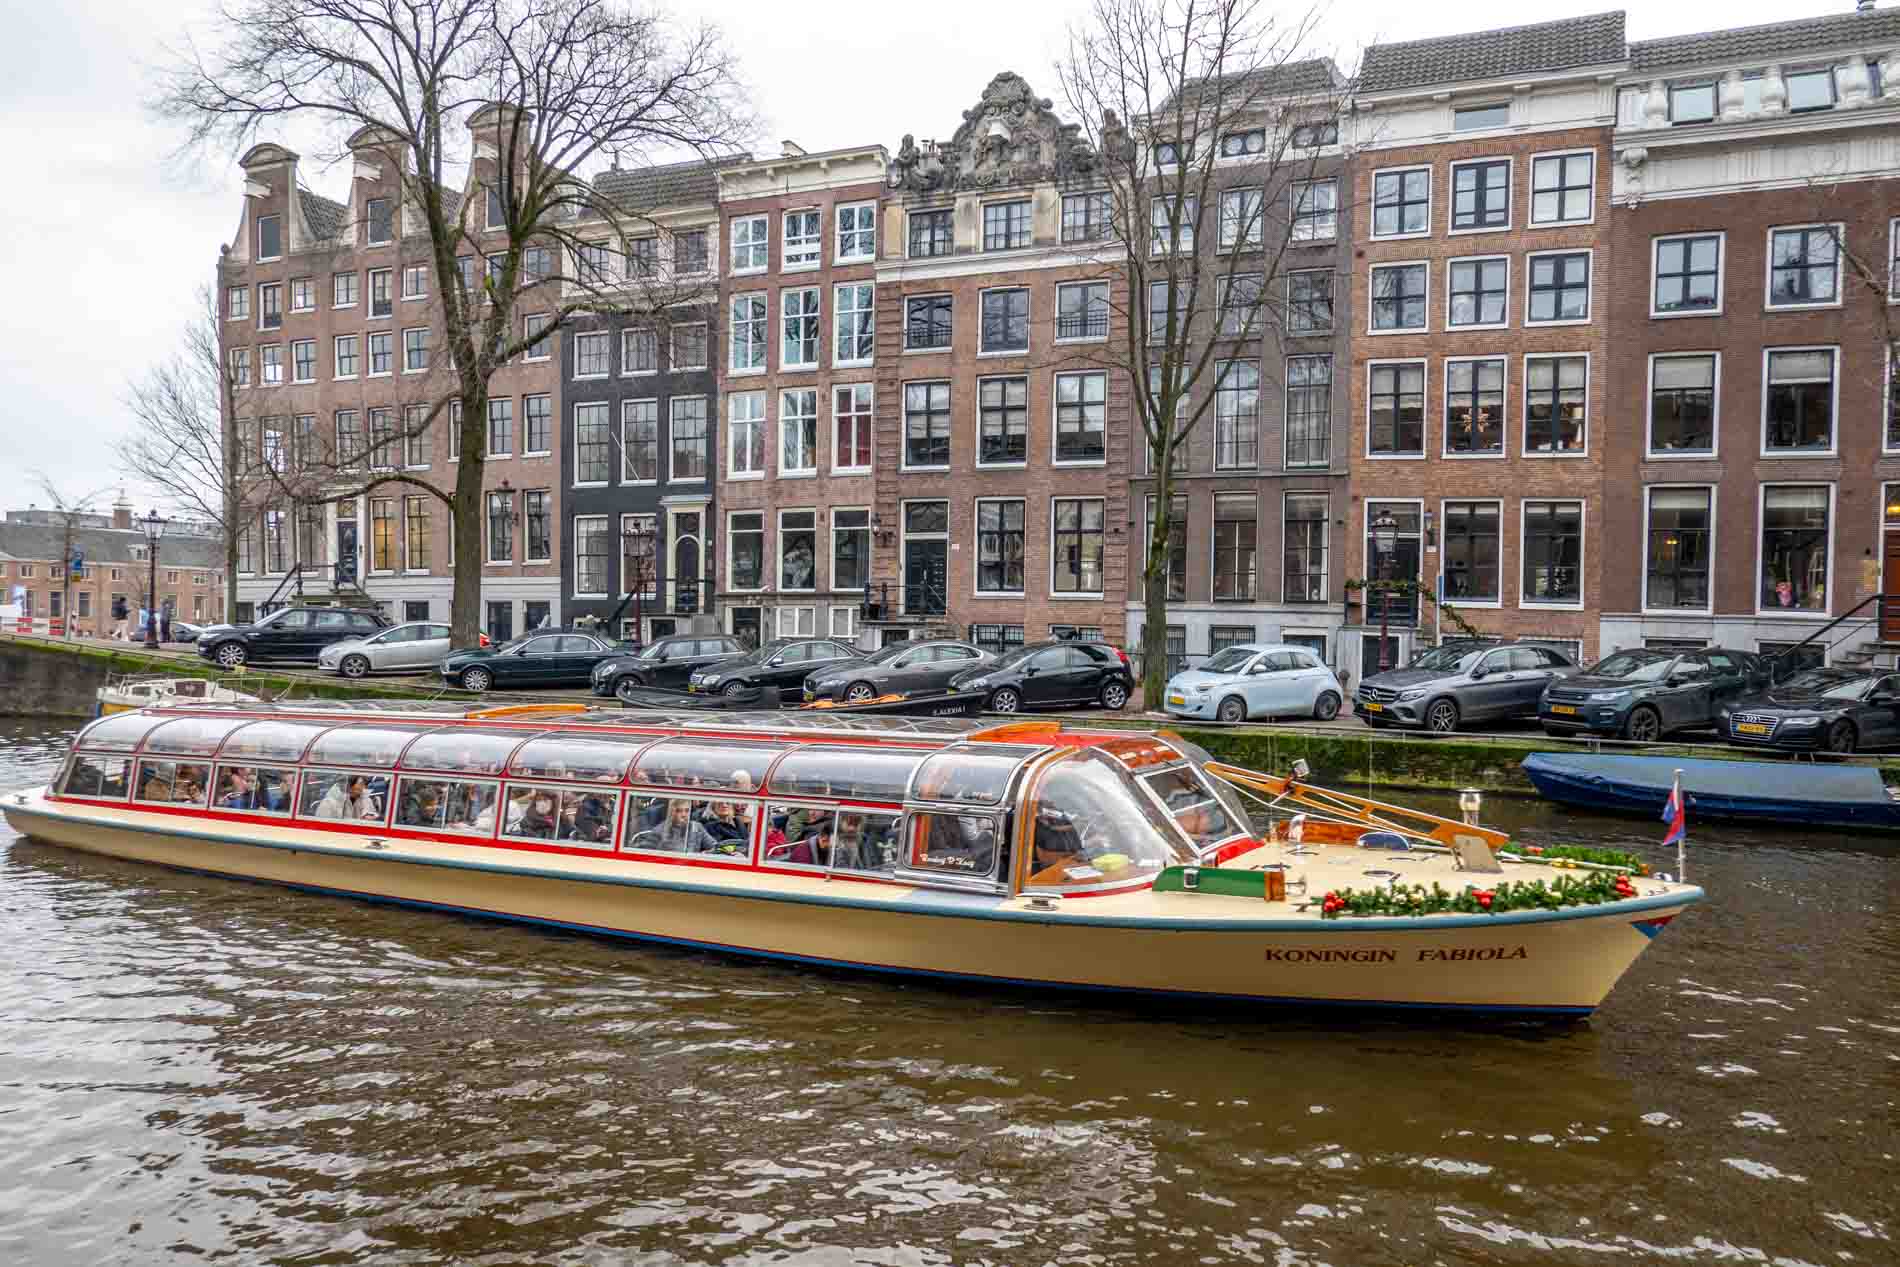 Canal cruise boat on the water